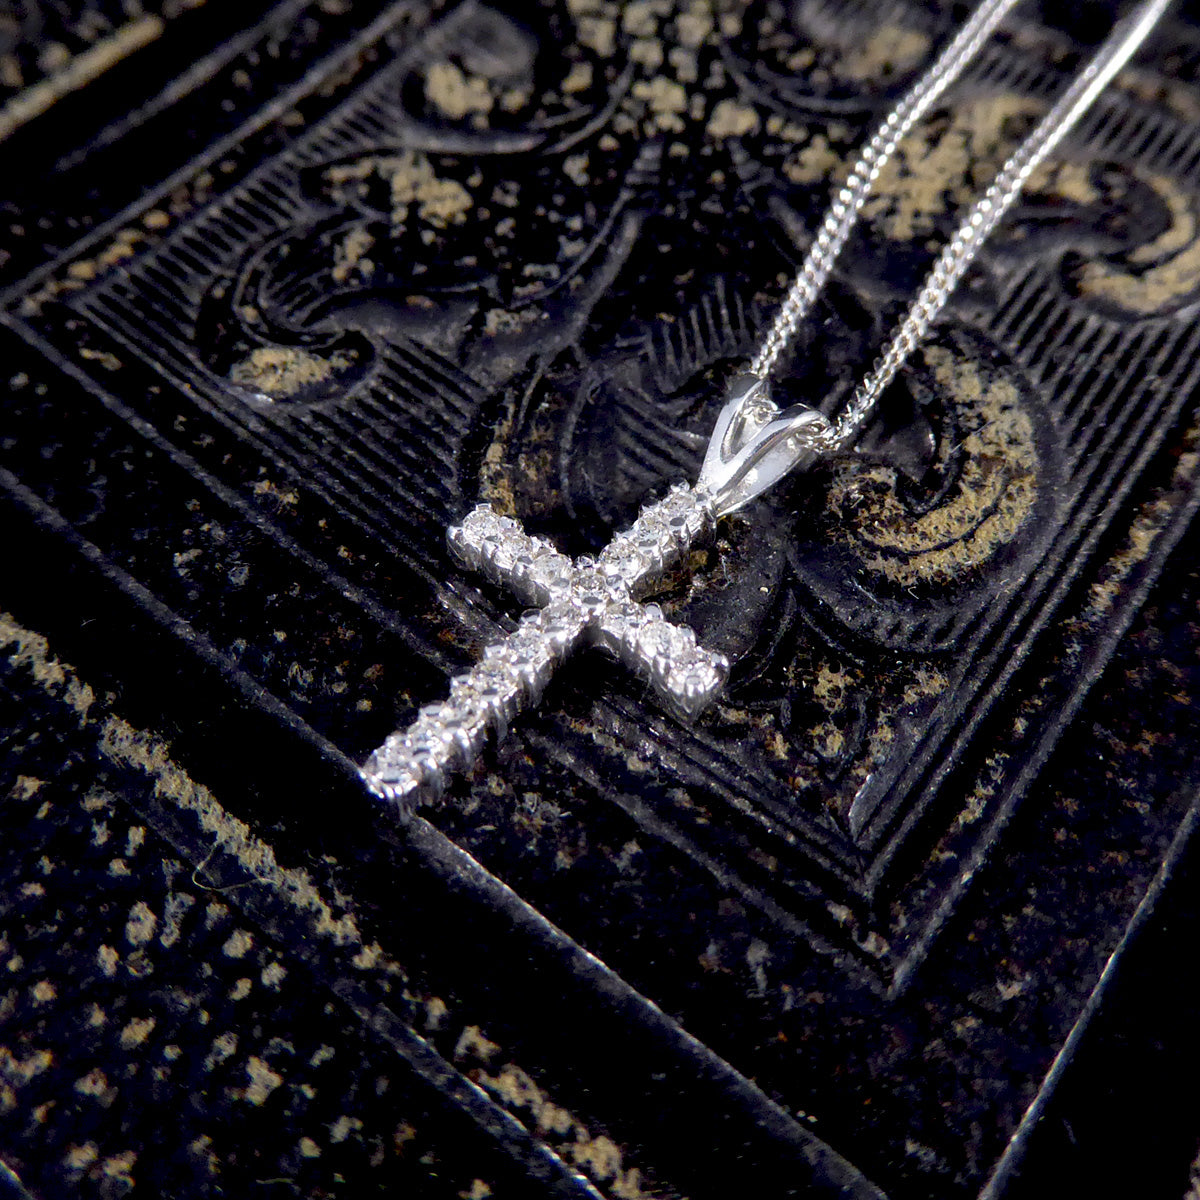 Diamond Cross Necklace in 18ct White Gold on 16inch 18ct White Gold Chain